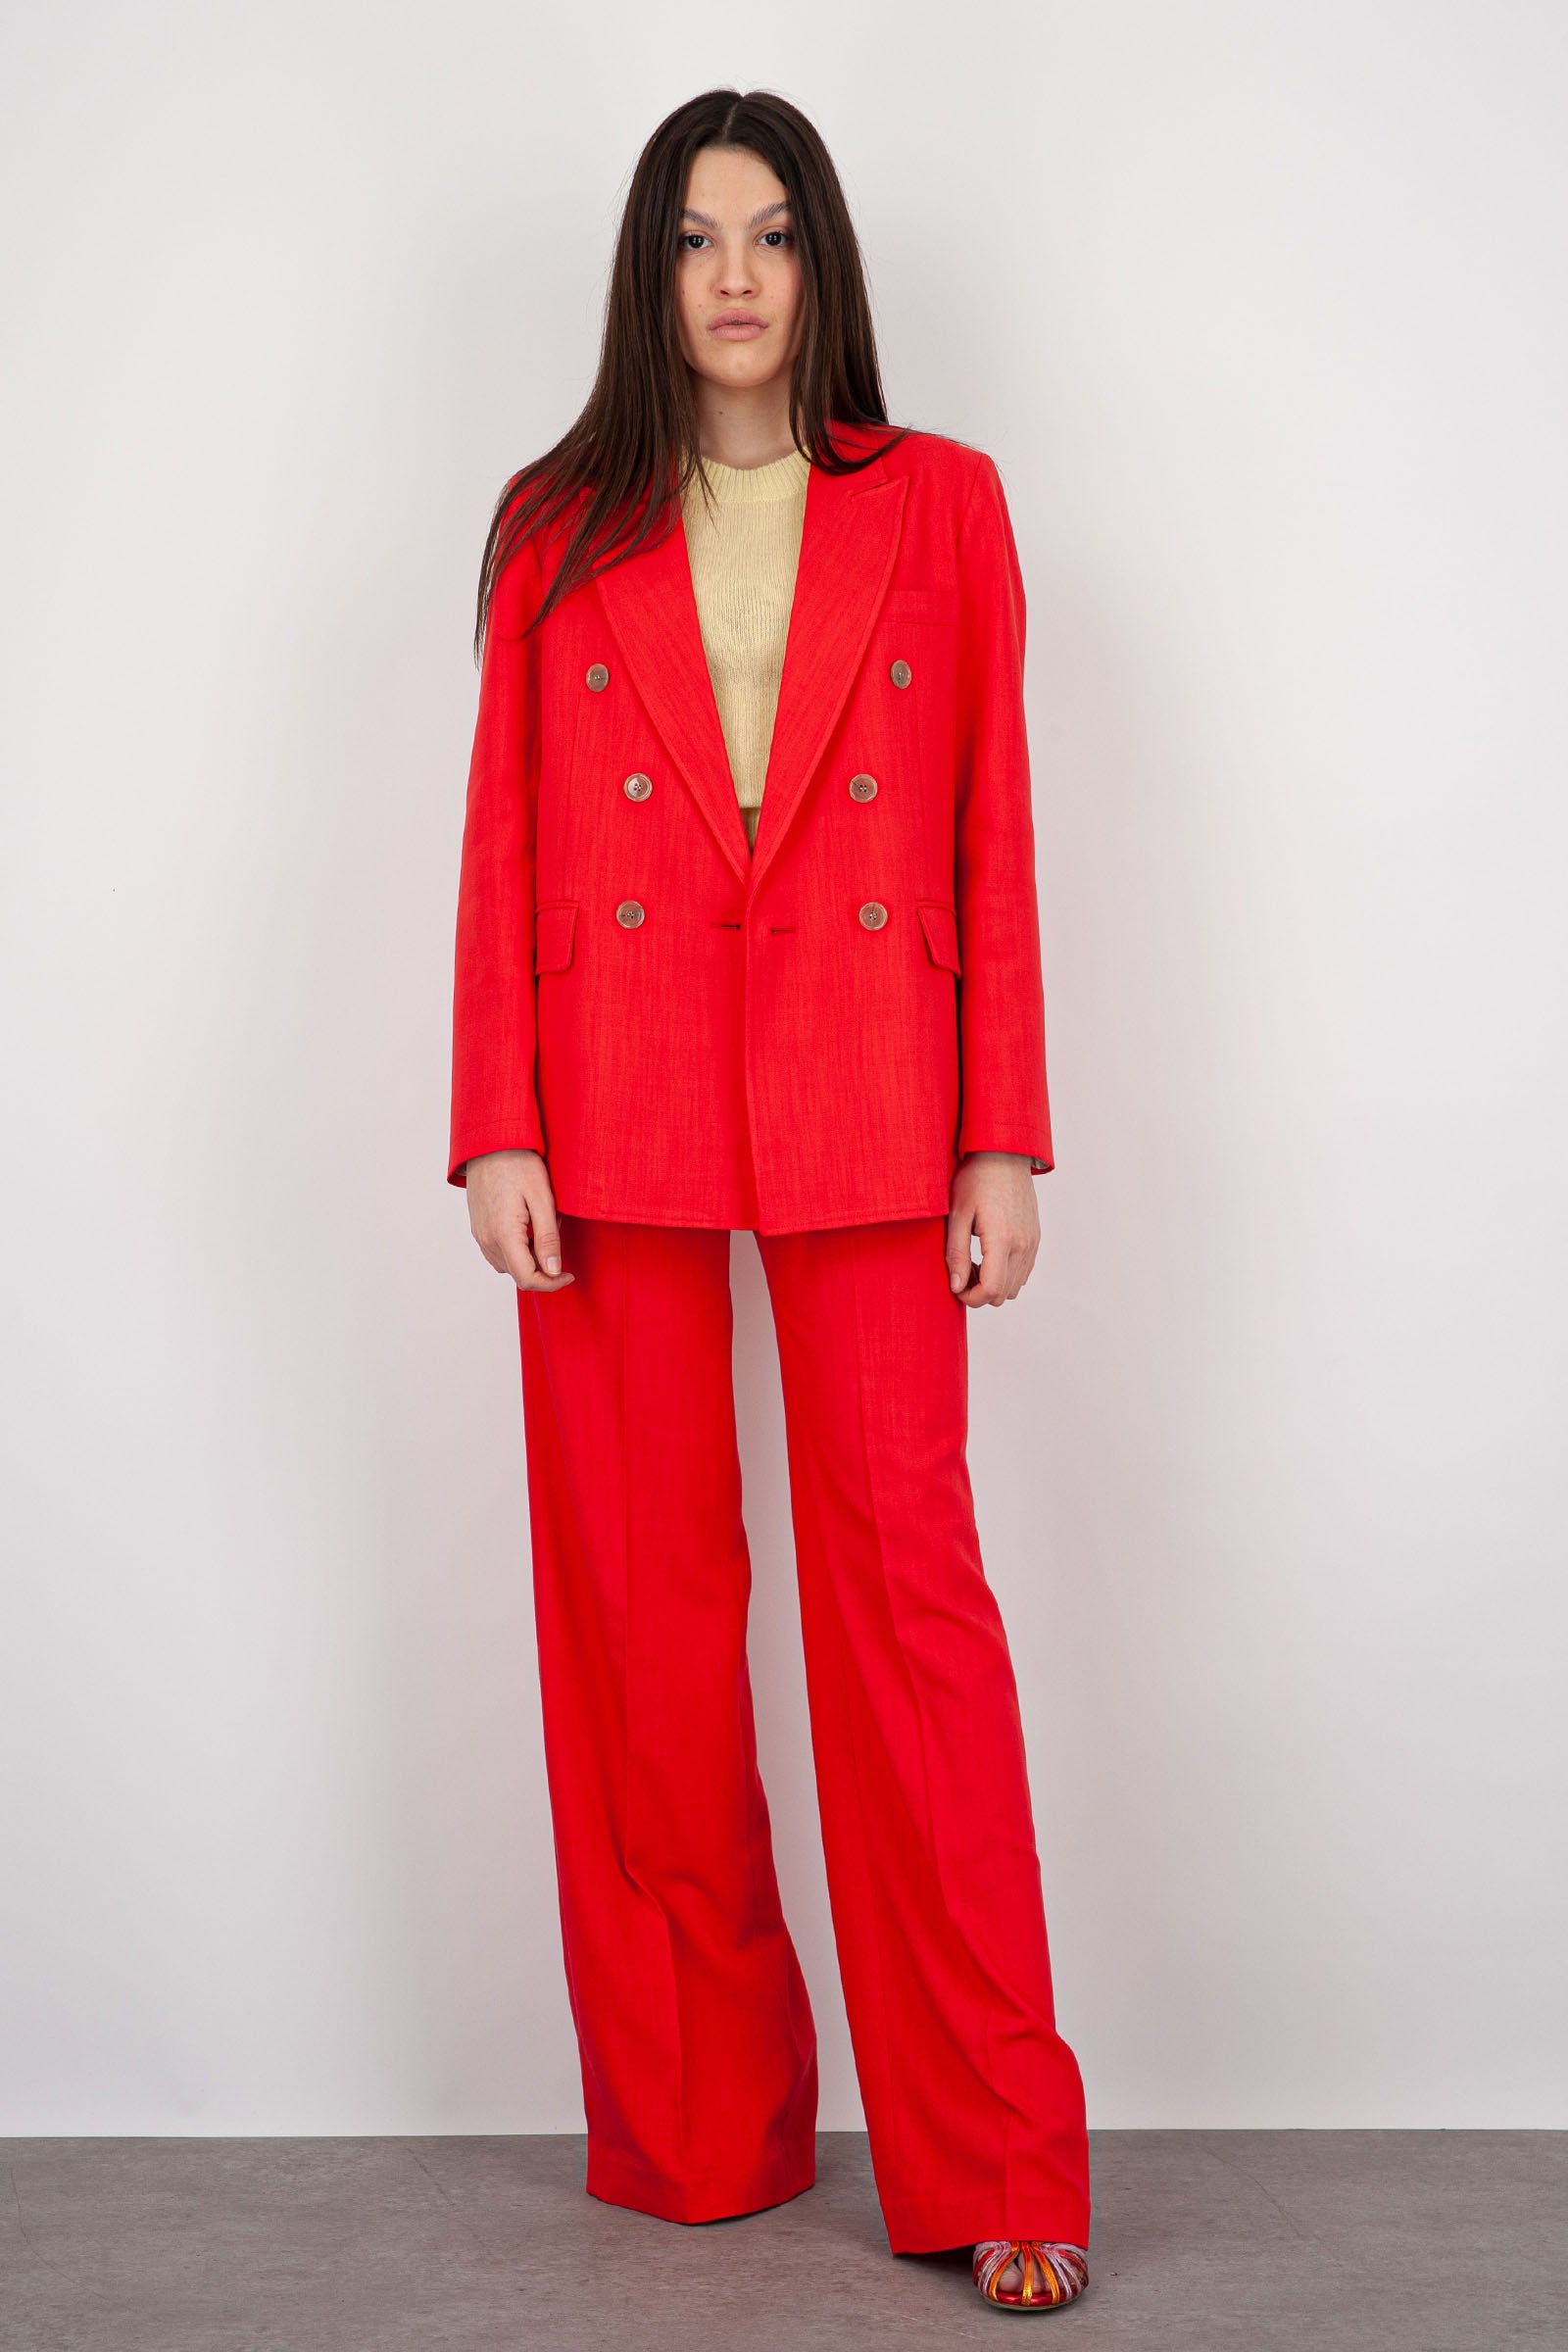 Department Five Synthetic Double-Breasted Coral Blazer - 2